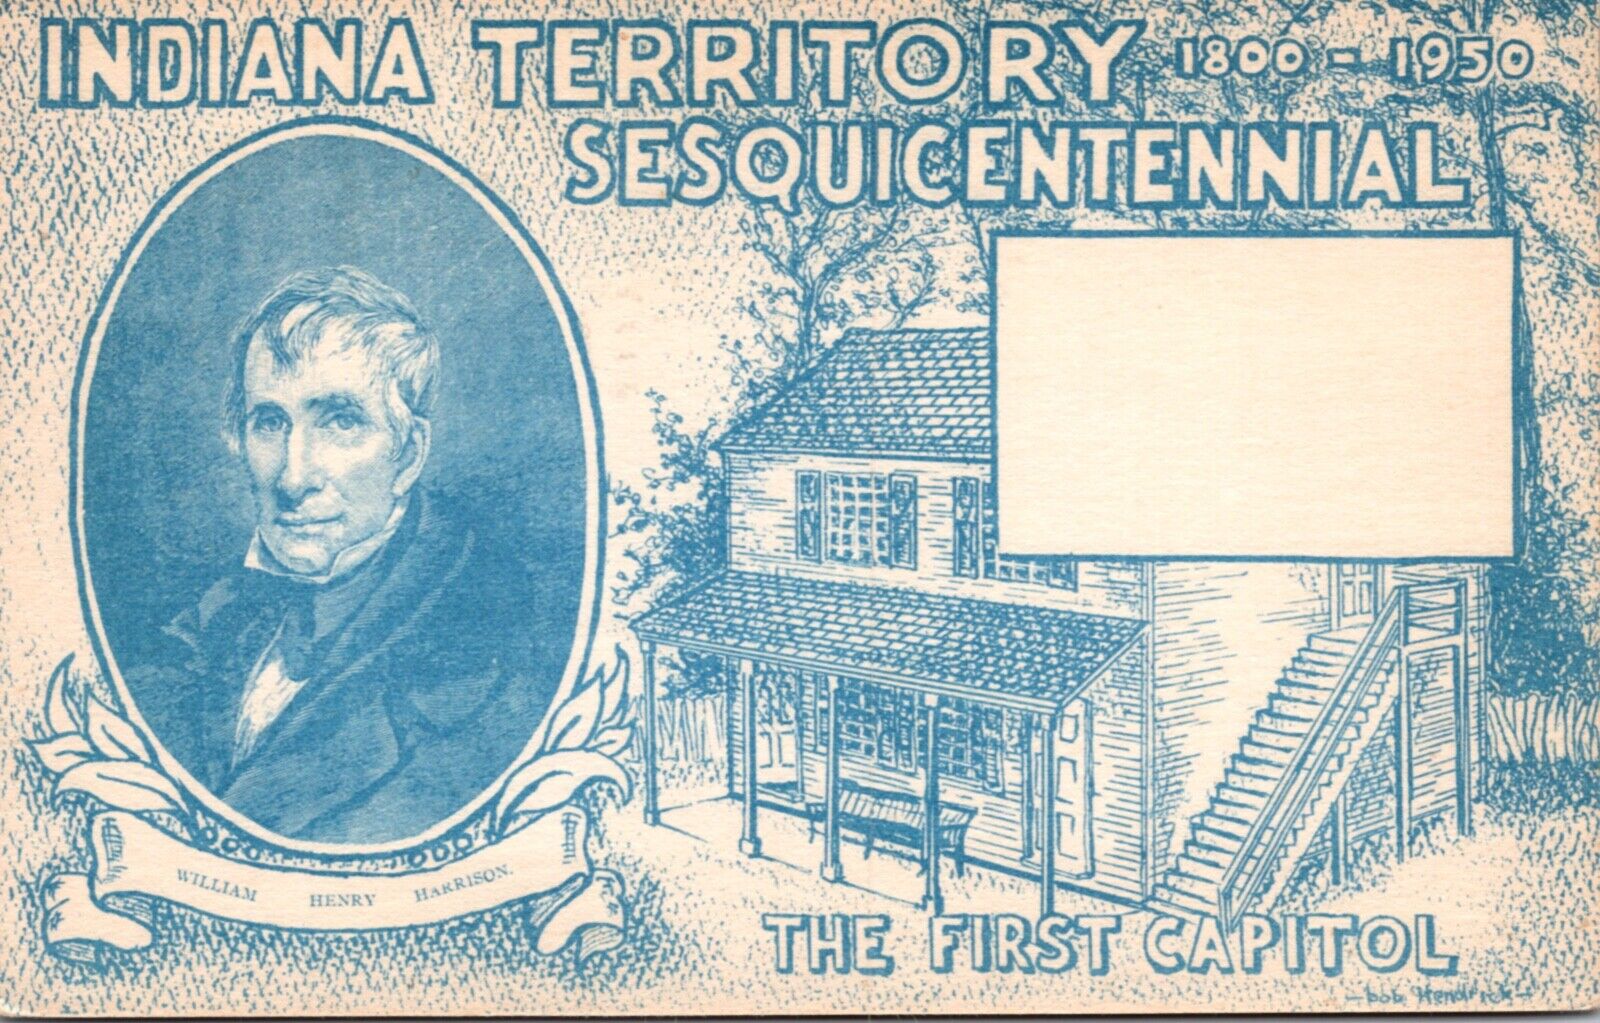 Postcard Indiana Territory Sesquicentennial 1800-1950 William Henry Harrison